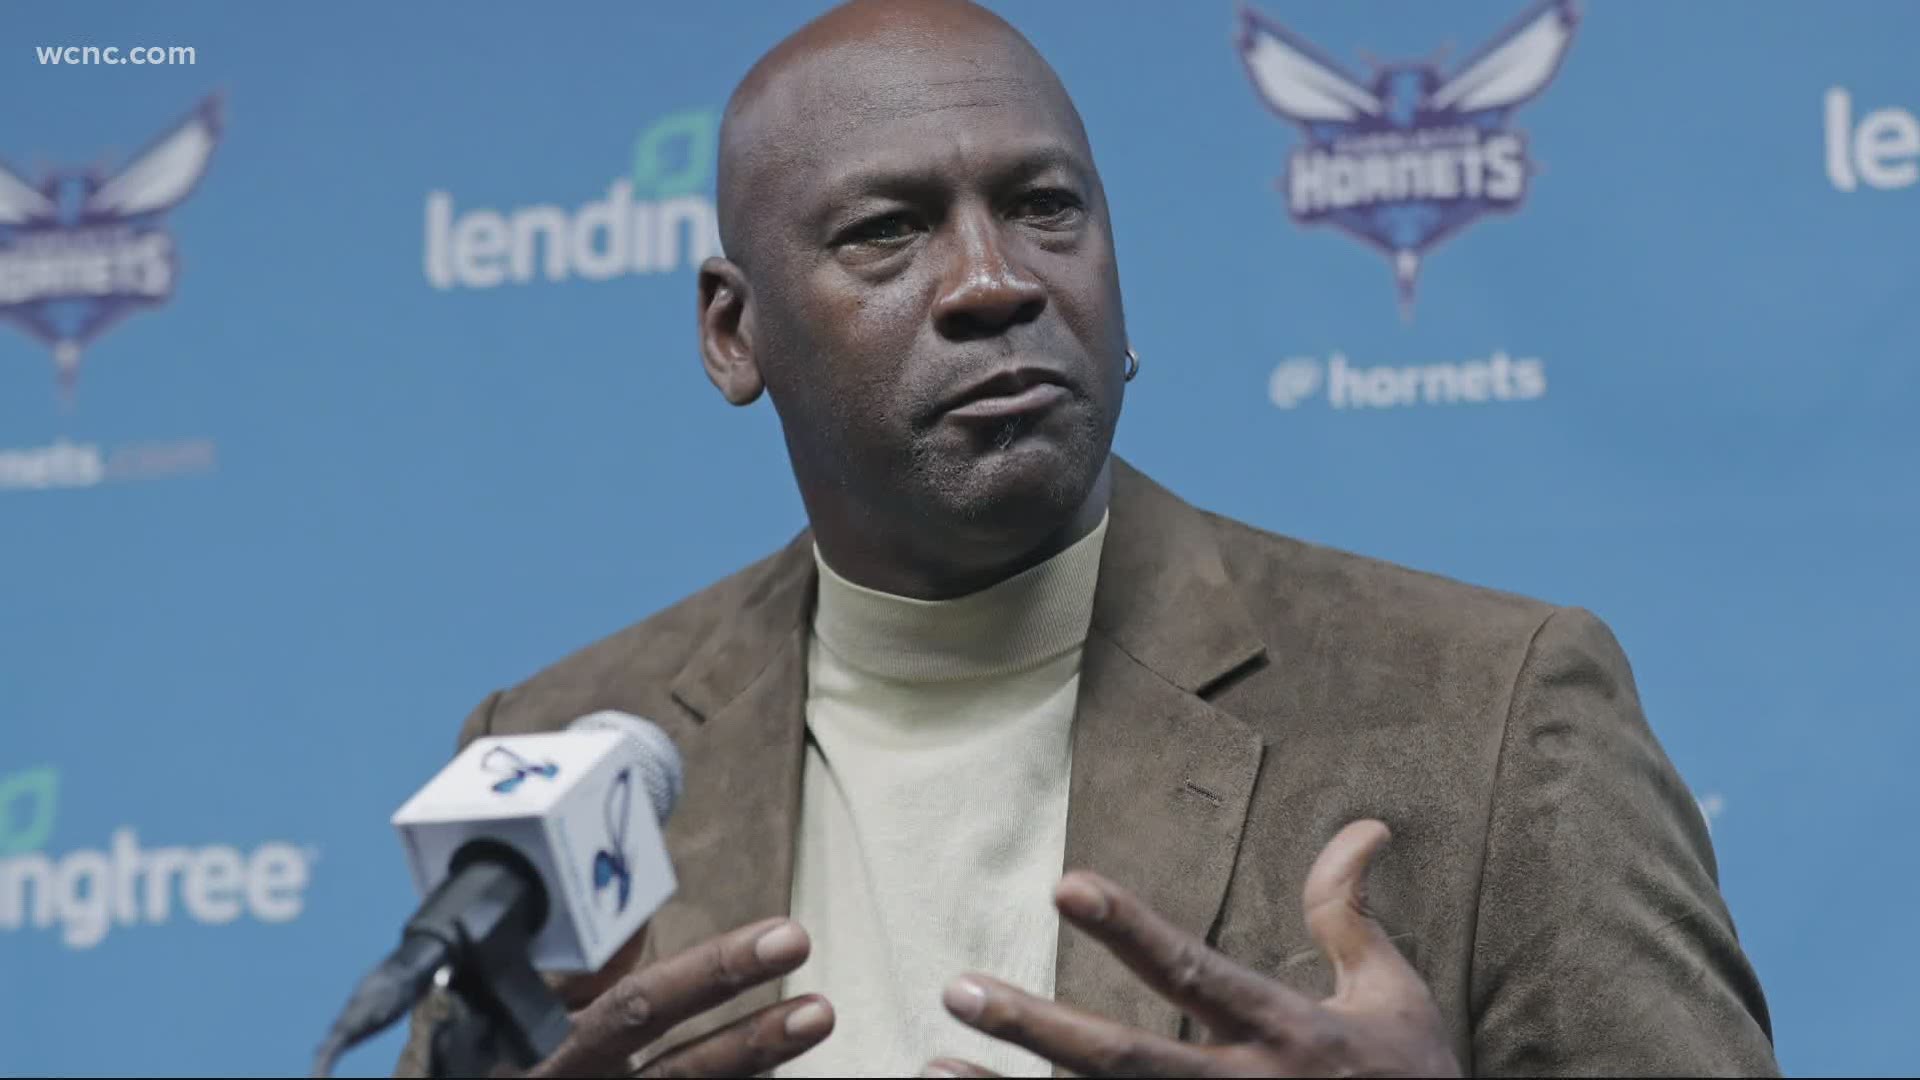 ESPN's "The Last Dance" was a smashing success. But Hornets fans in Charlotte might've been thinking they know a different Michael Jordan than the Bulls legend.